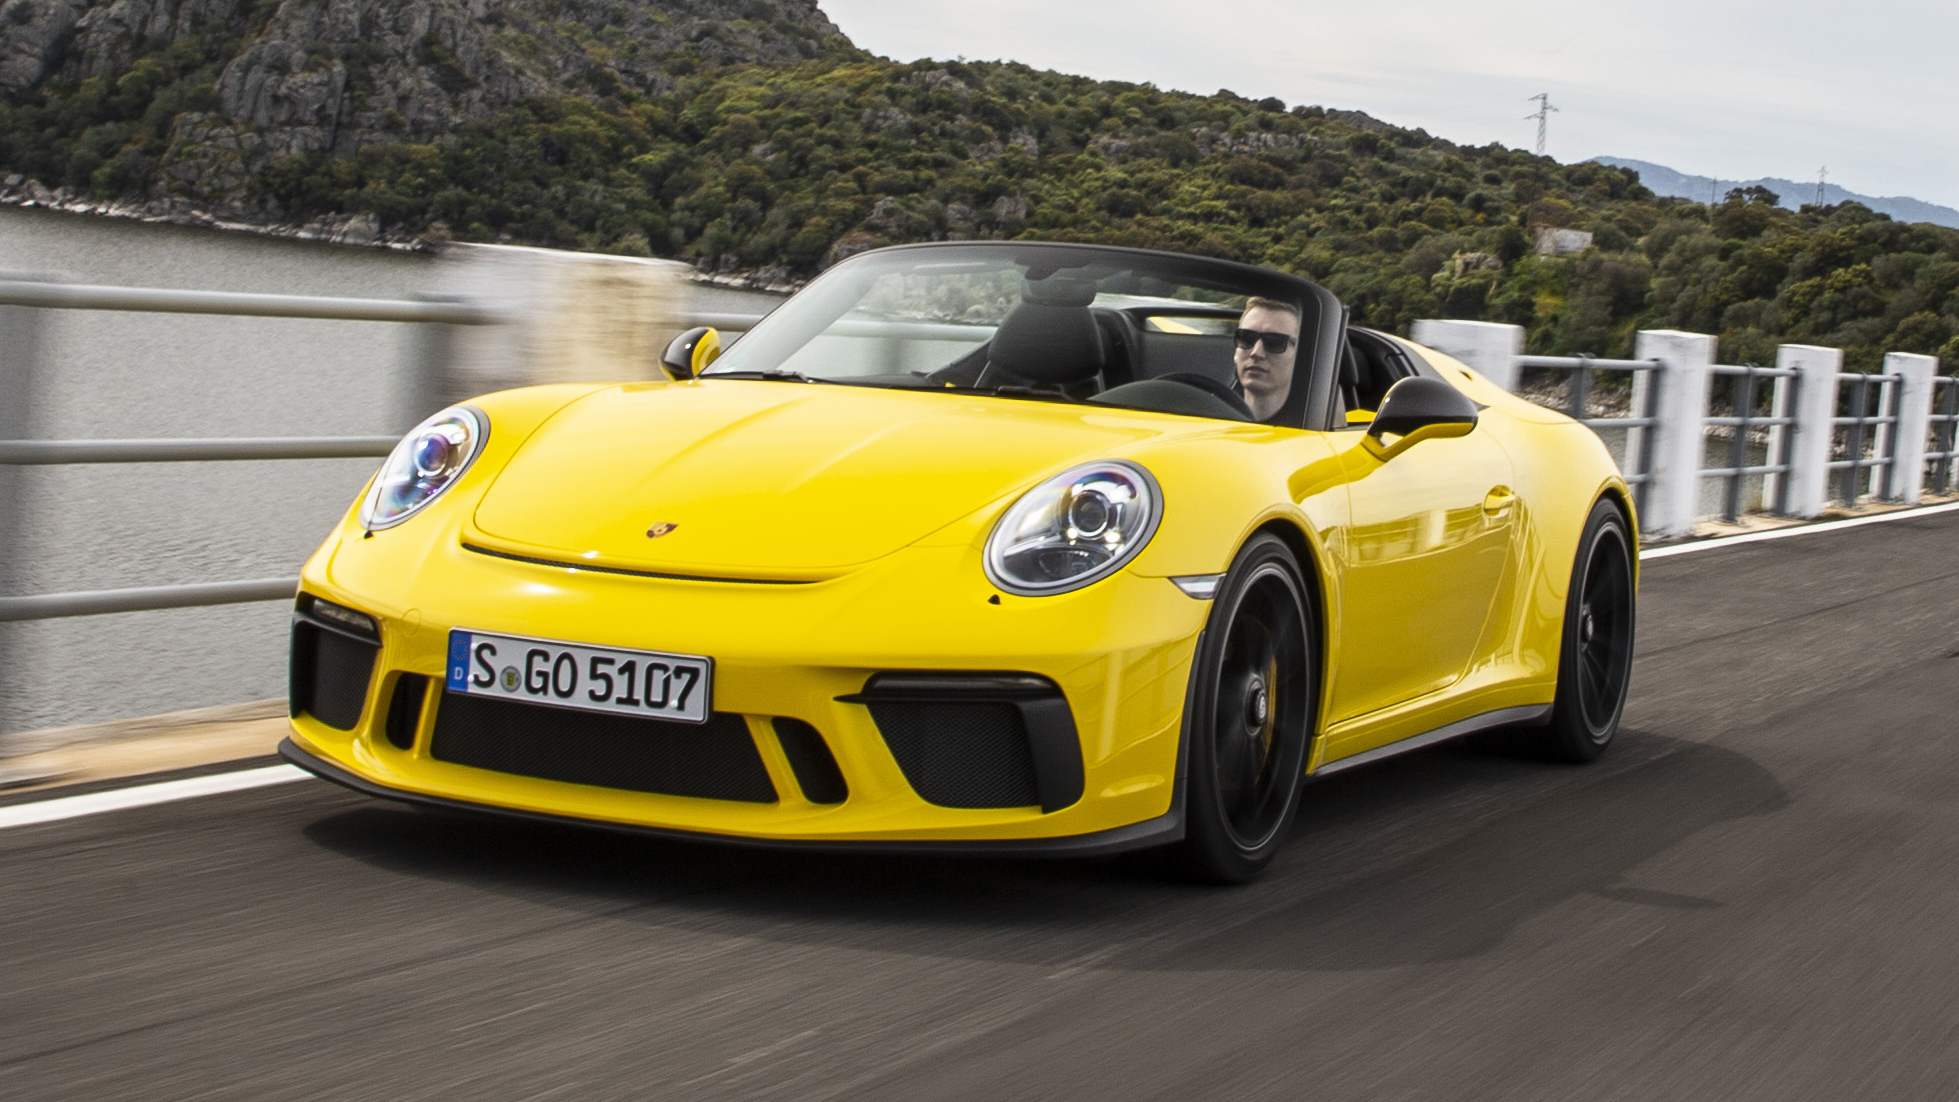 2019 Porsche 911 Speedster First Drive Review Whats New Specs And Driving Impressions Autoblog